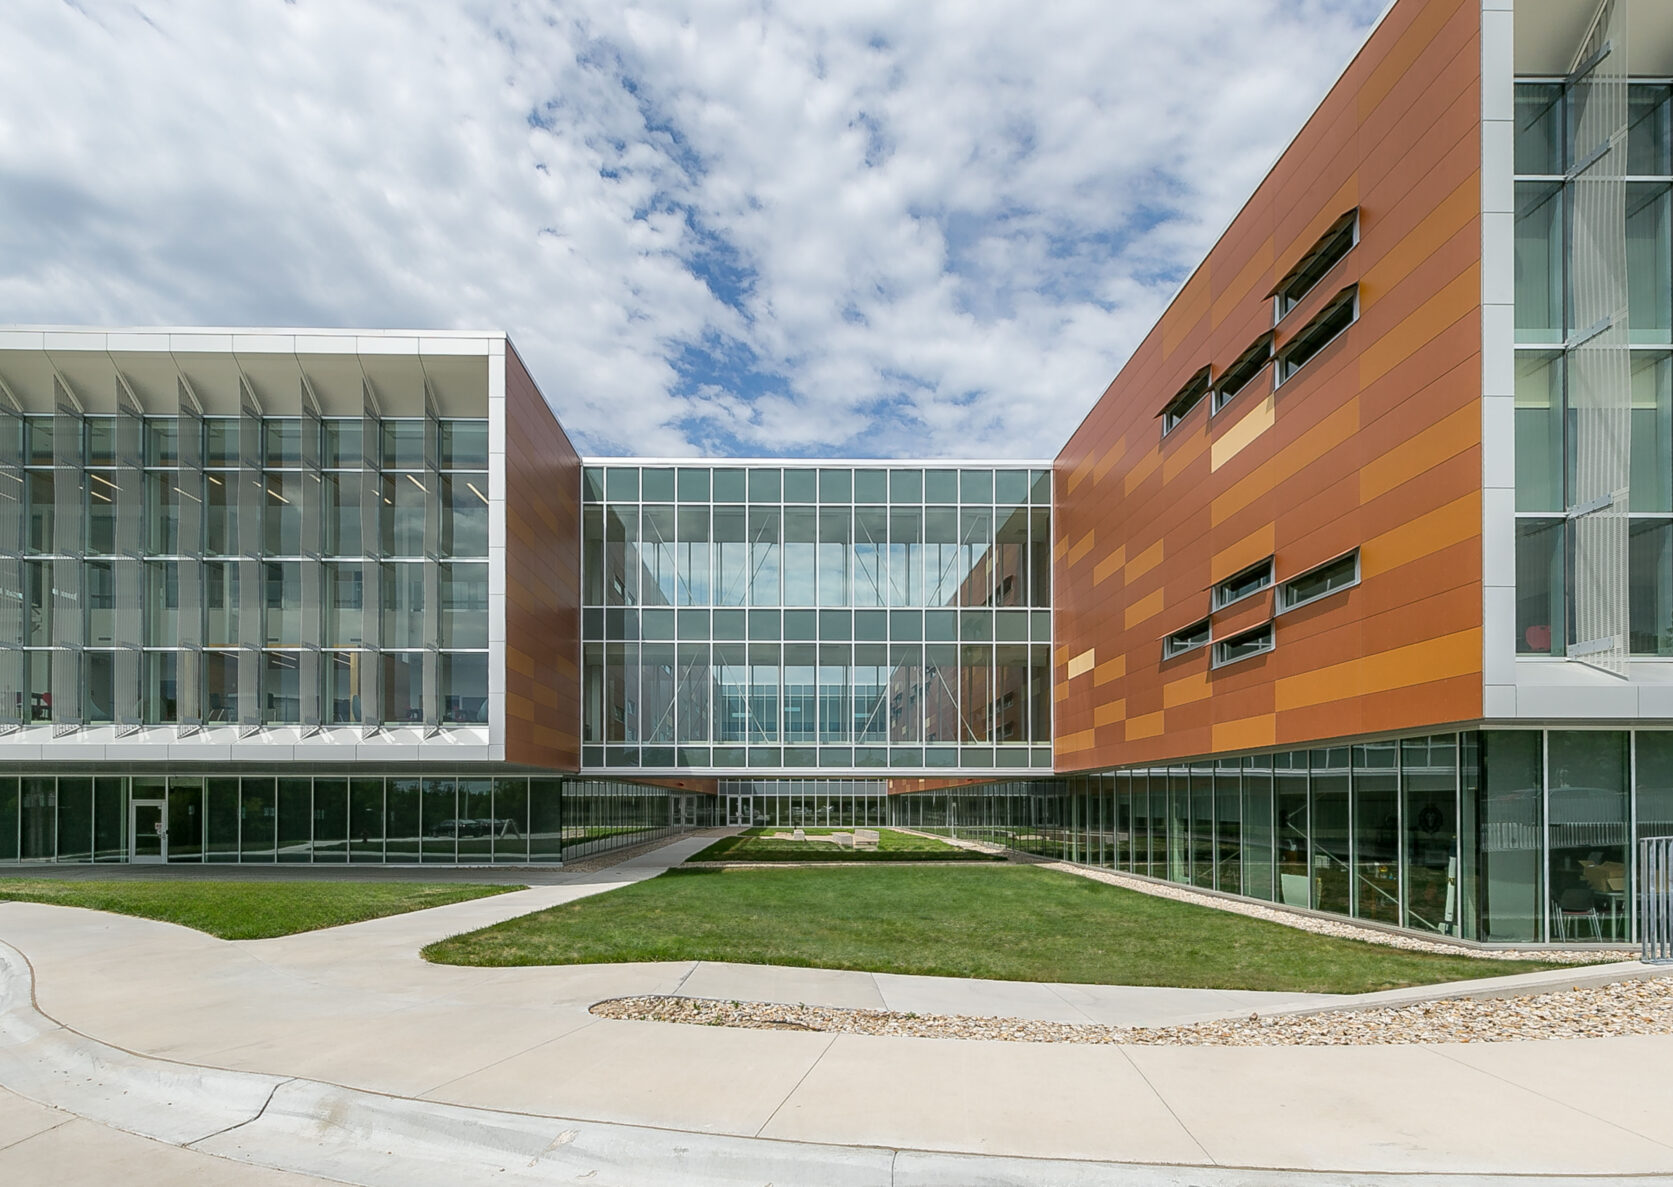 Manhattan High School's West Campus - project completed by McCownGordon Construction